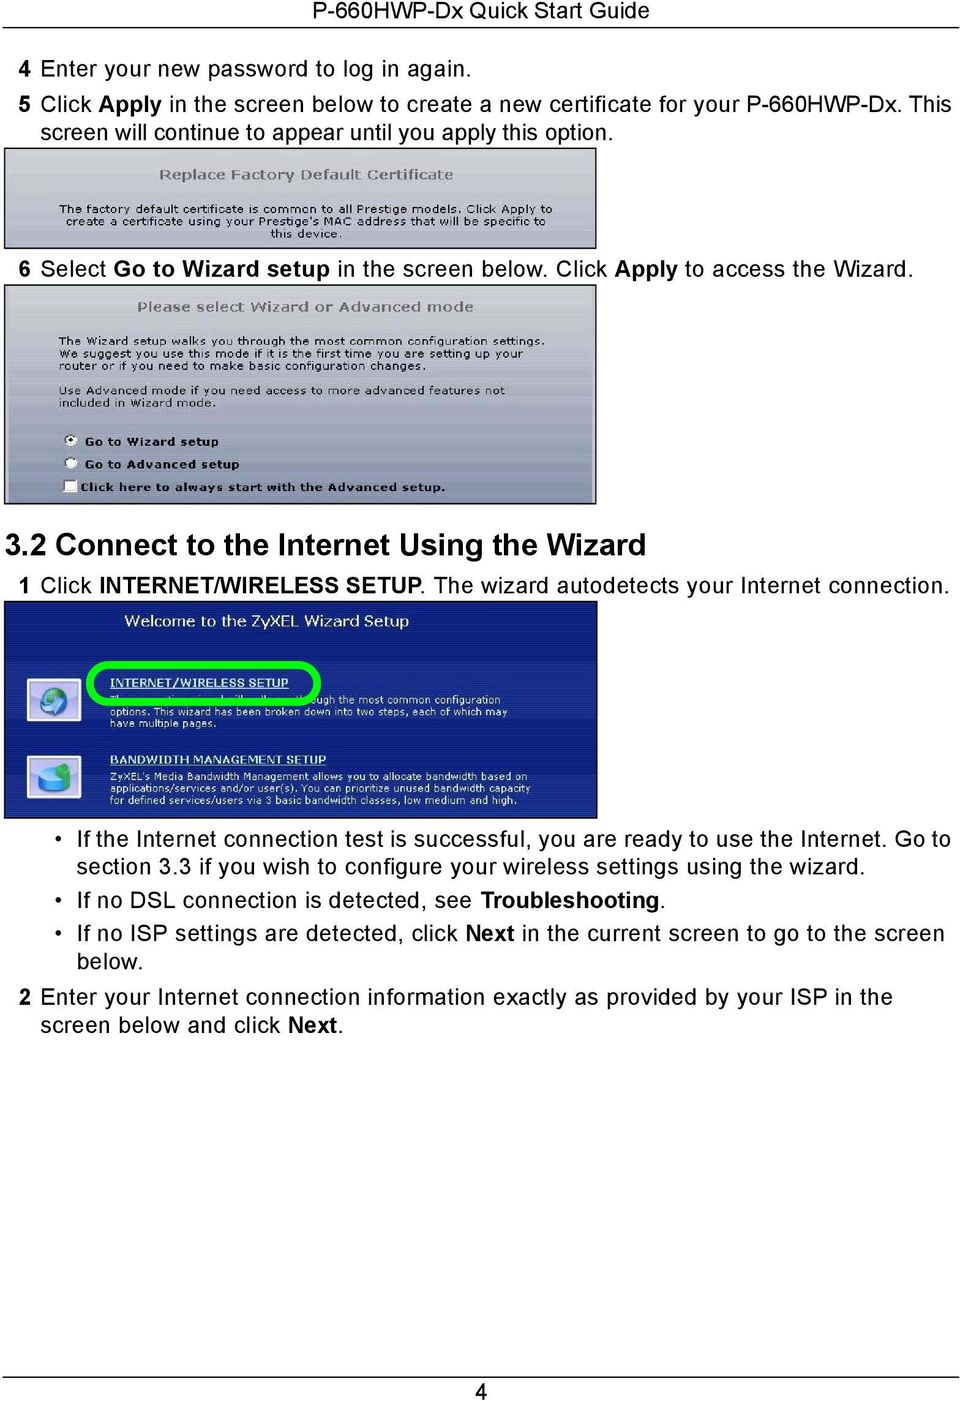 The wizard autodetects your Internet connection. If the Internet connection test is successful, you are ready to use the Internet. Go to section 3.